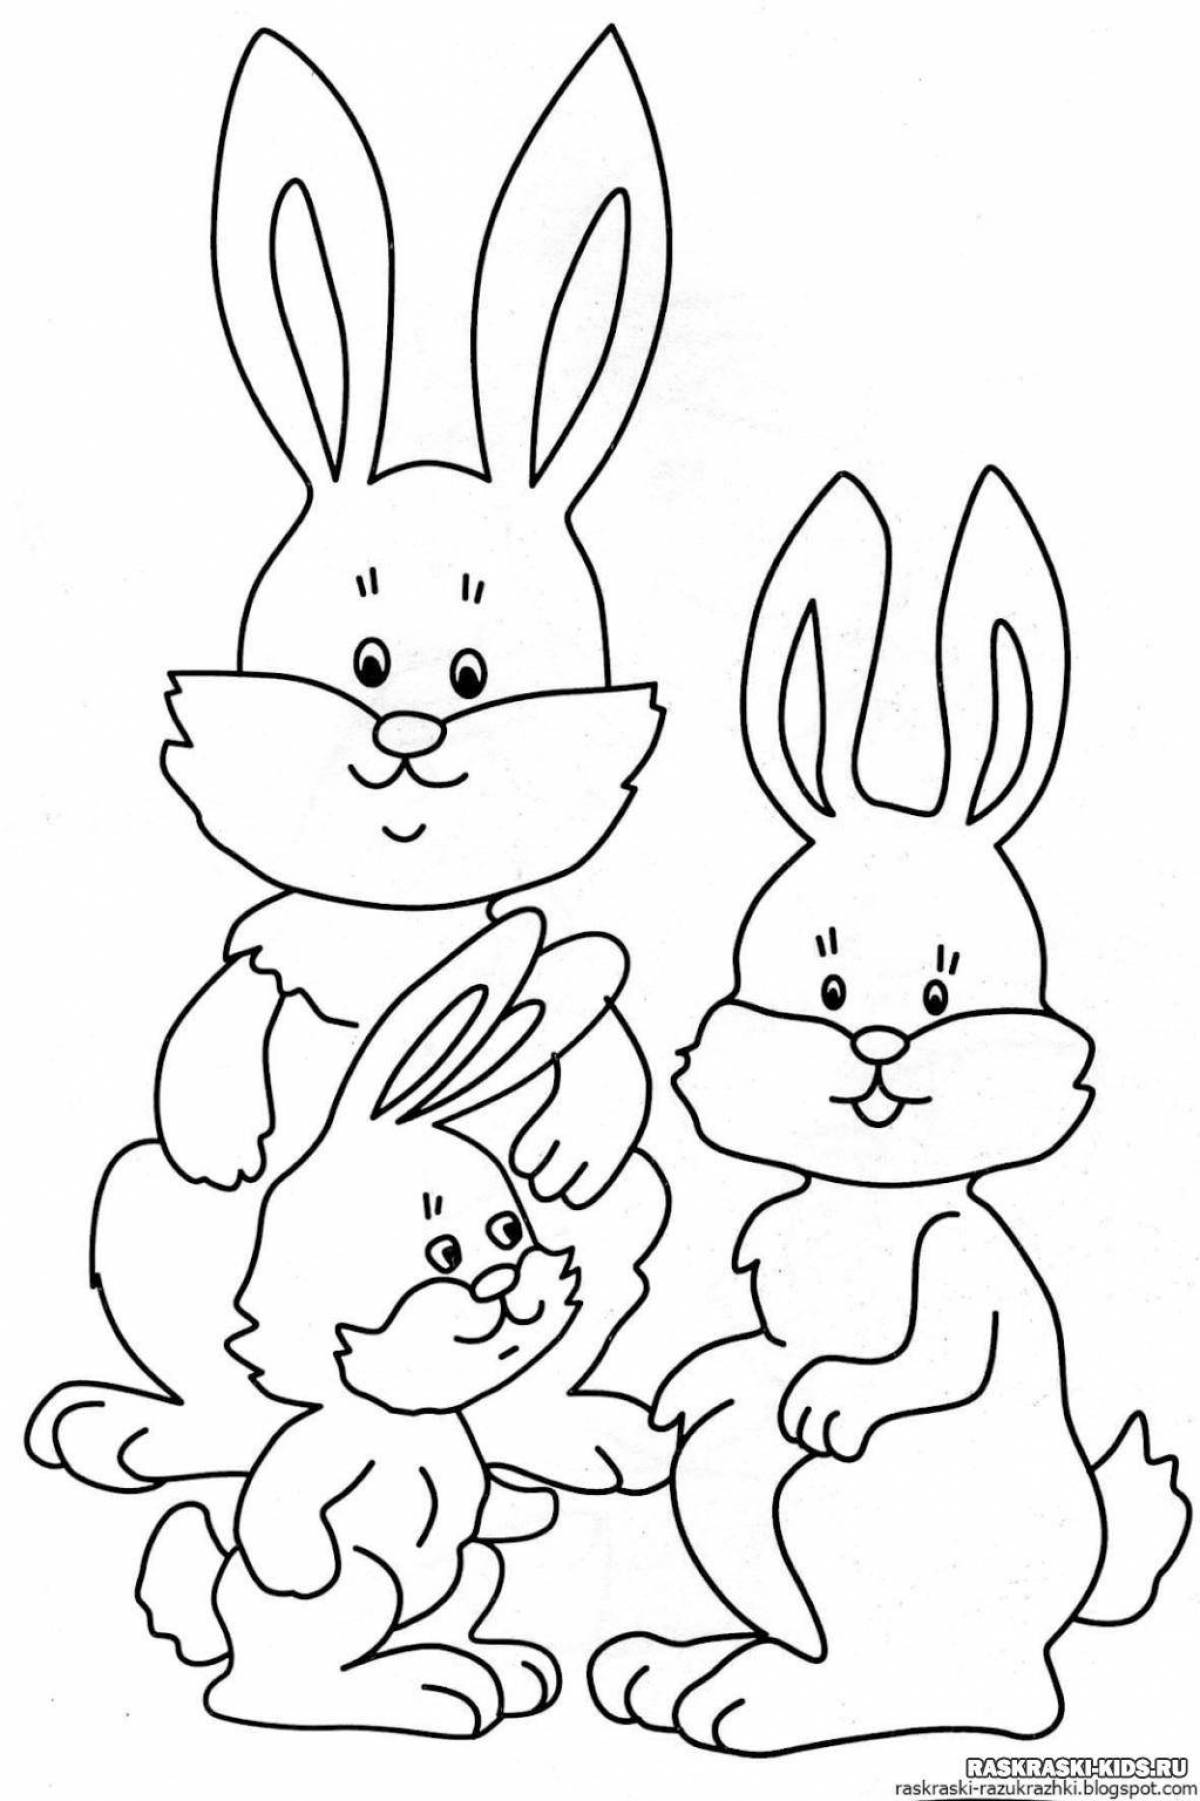 Puffy bunny print coloring pages